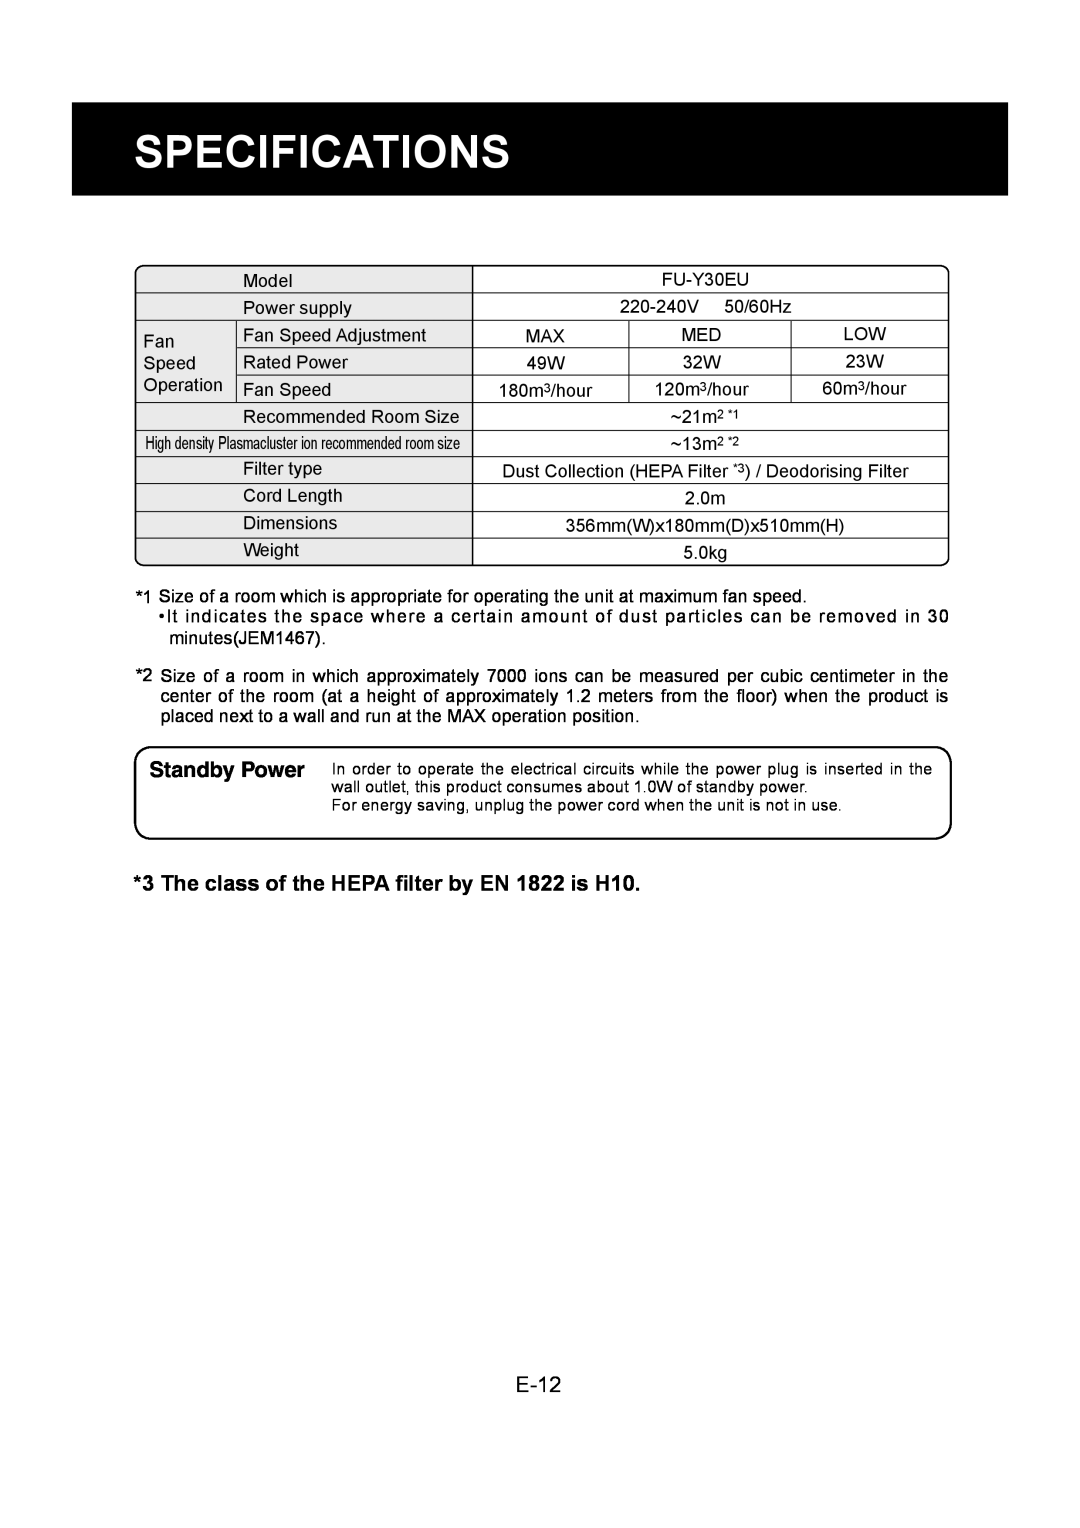 Sharp FU-Y30EU operation manual Specifications, The class of the HEPA ﬁlter by EN 1822 is H10, E-12 